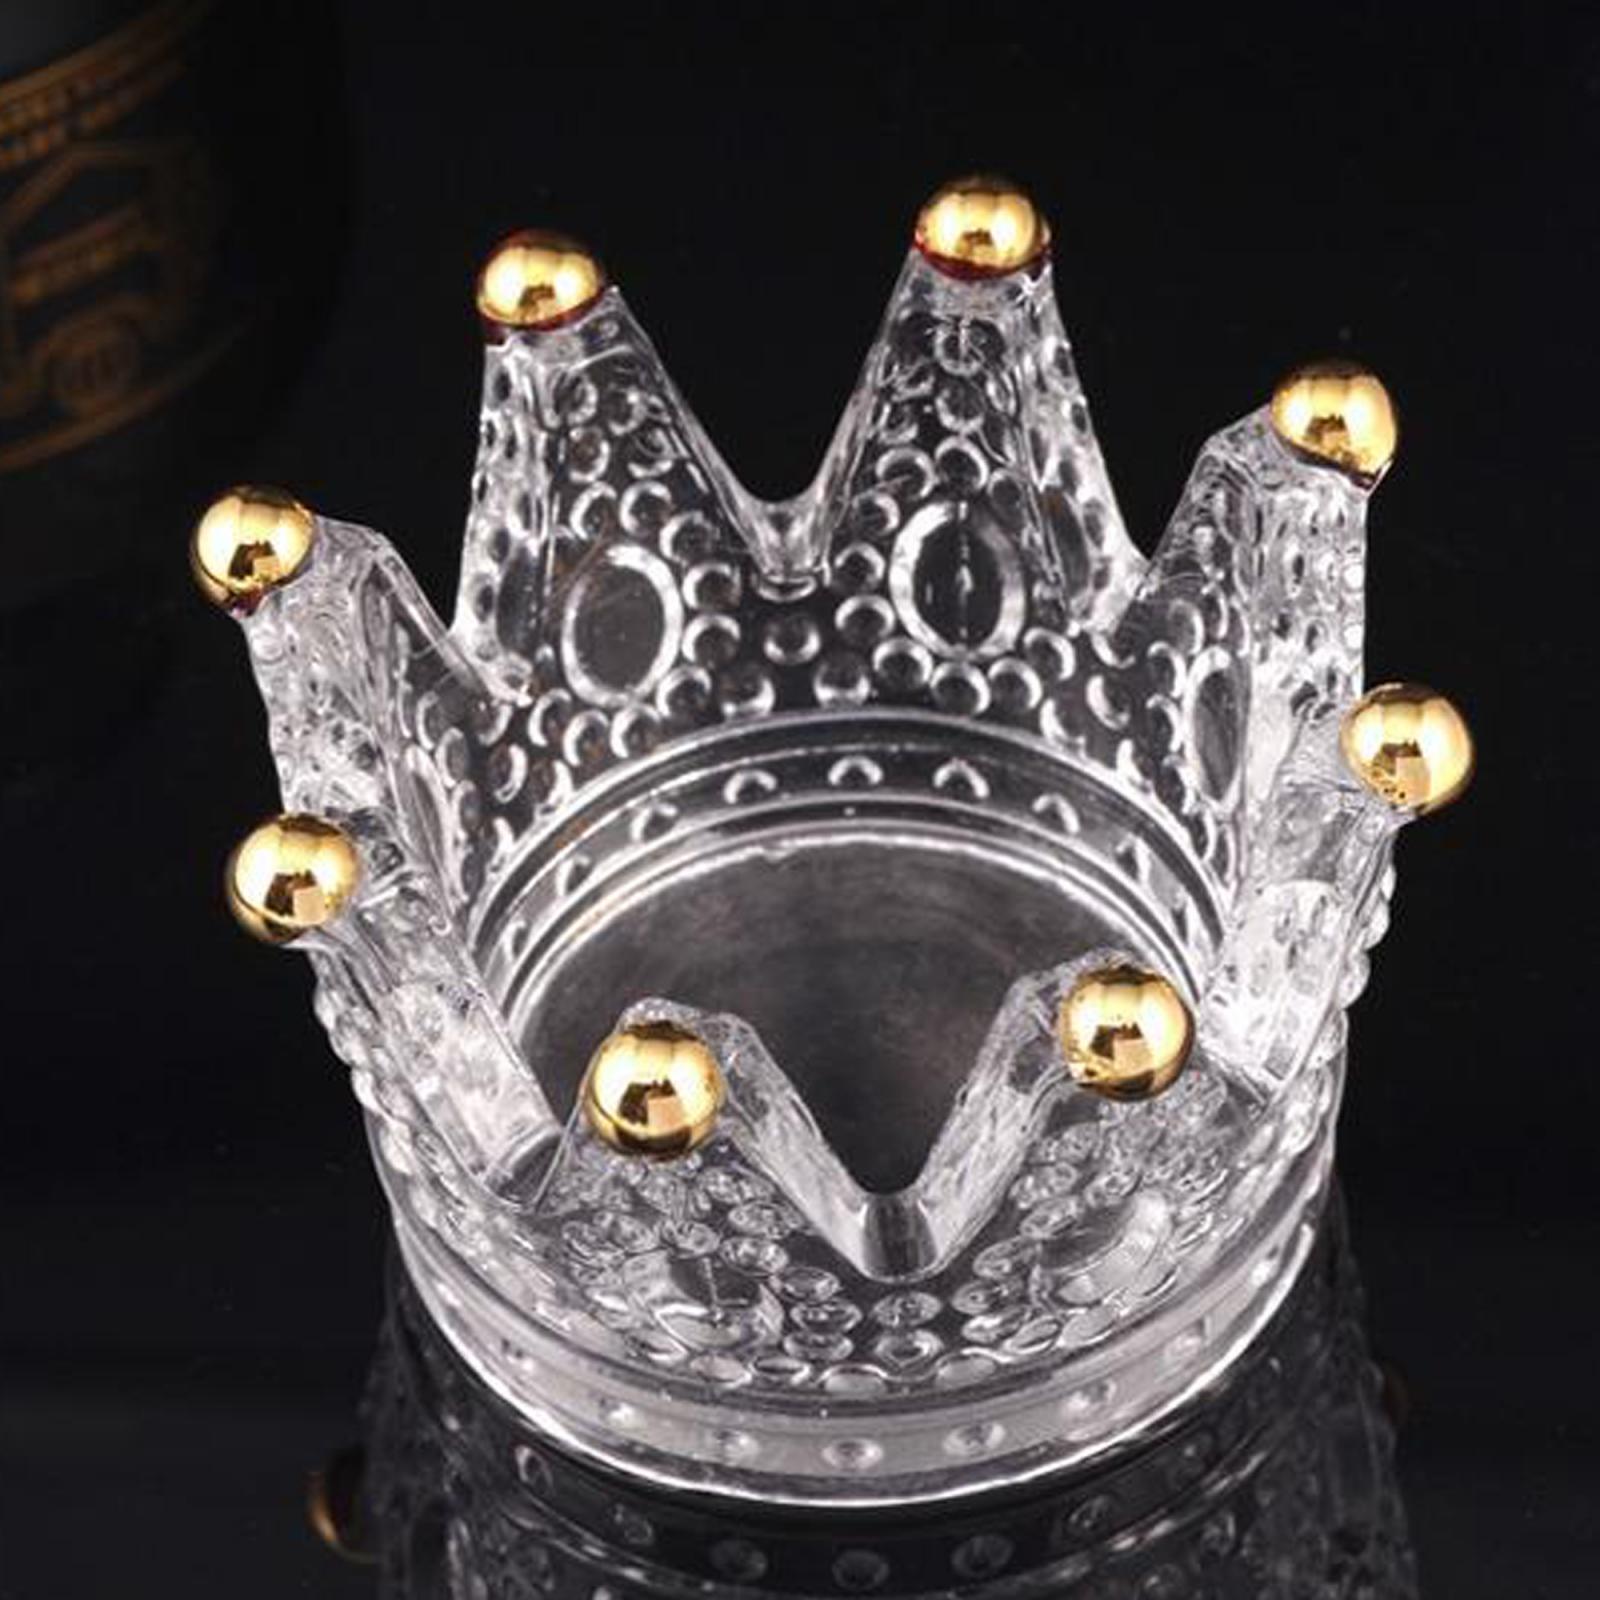 Crown Crystal Nail Art Dappen Dish Pen Holder Glass Dapping Bowl for Acrylic: Gold-plated crown